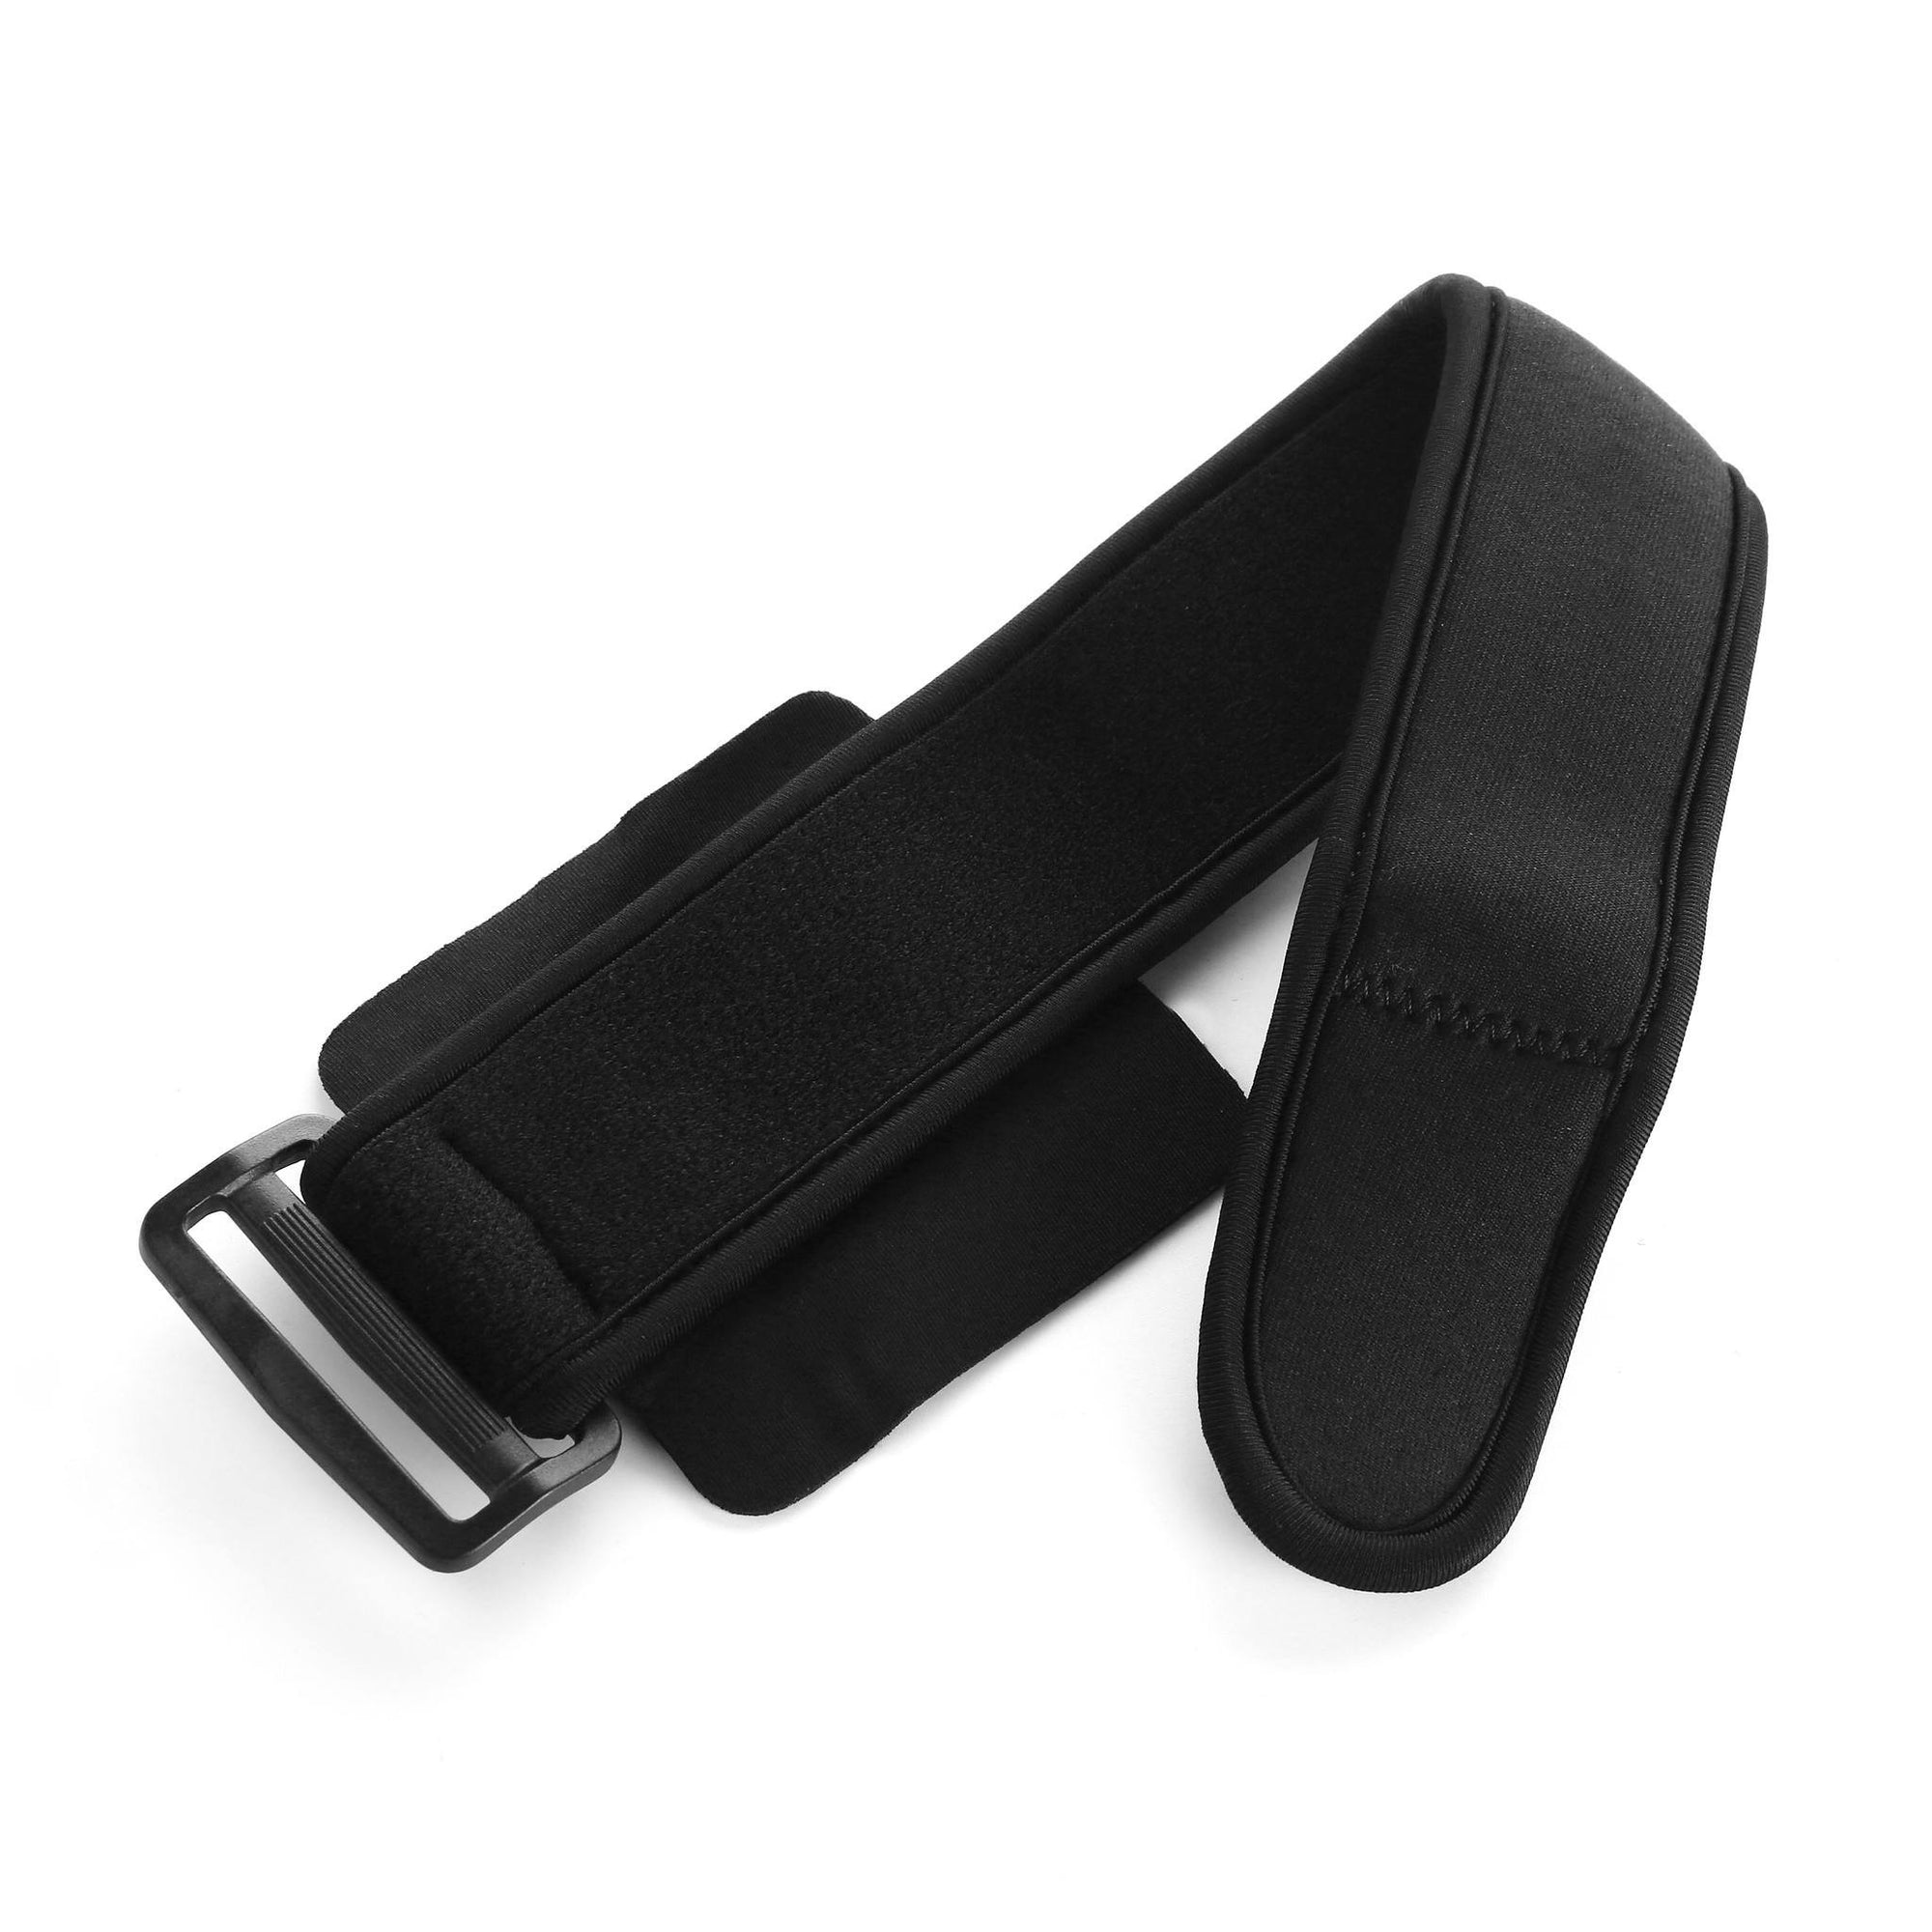 XL Armband strap for swimcell key case running armband